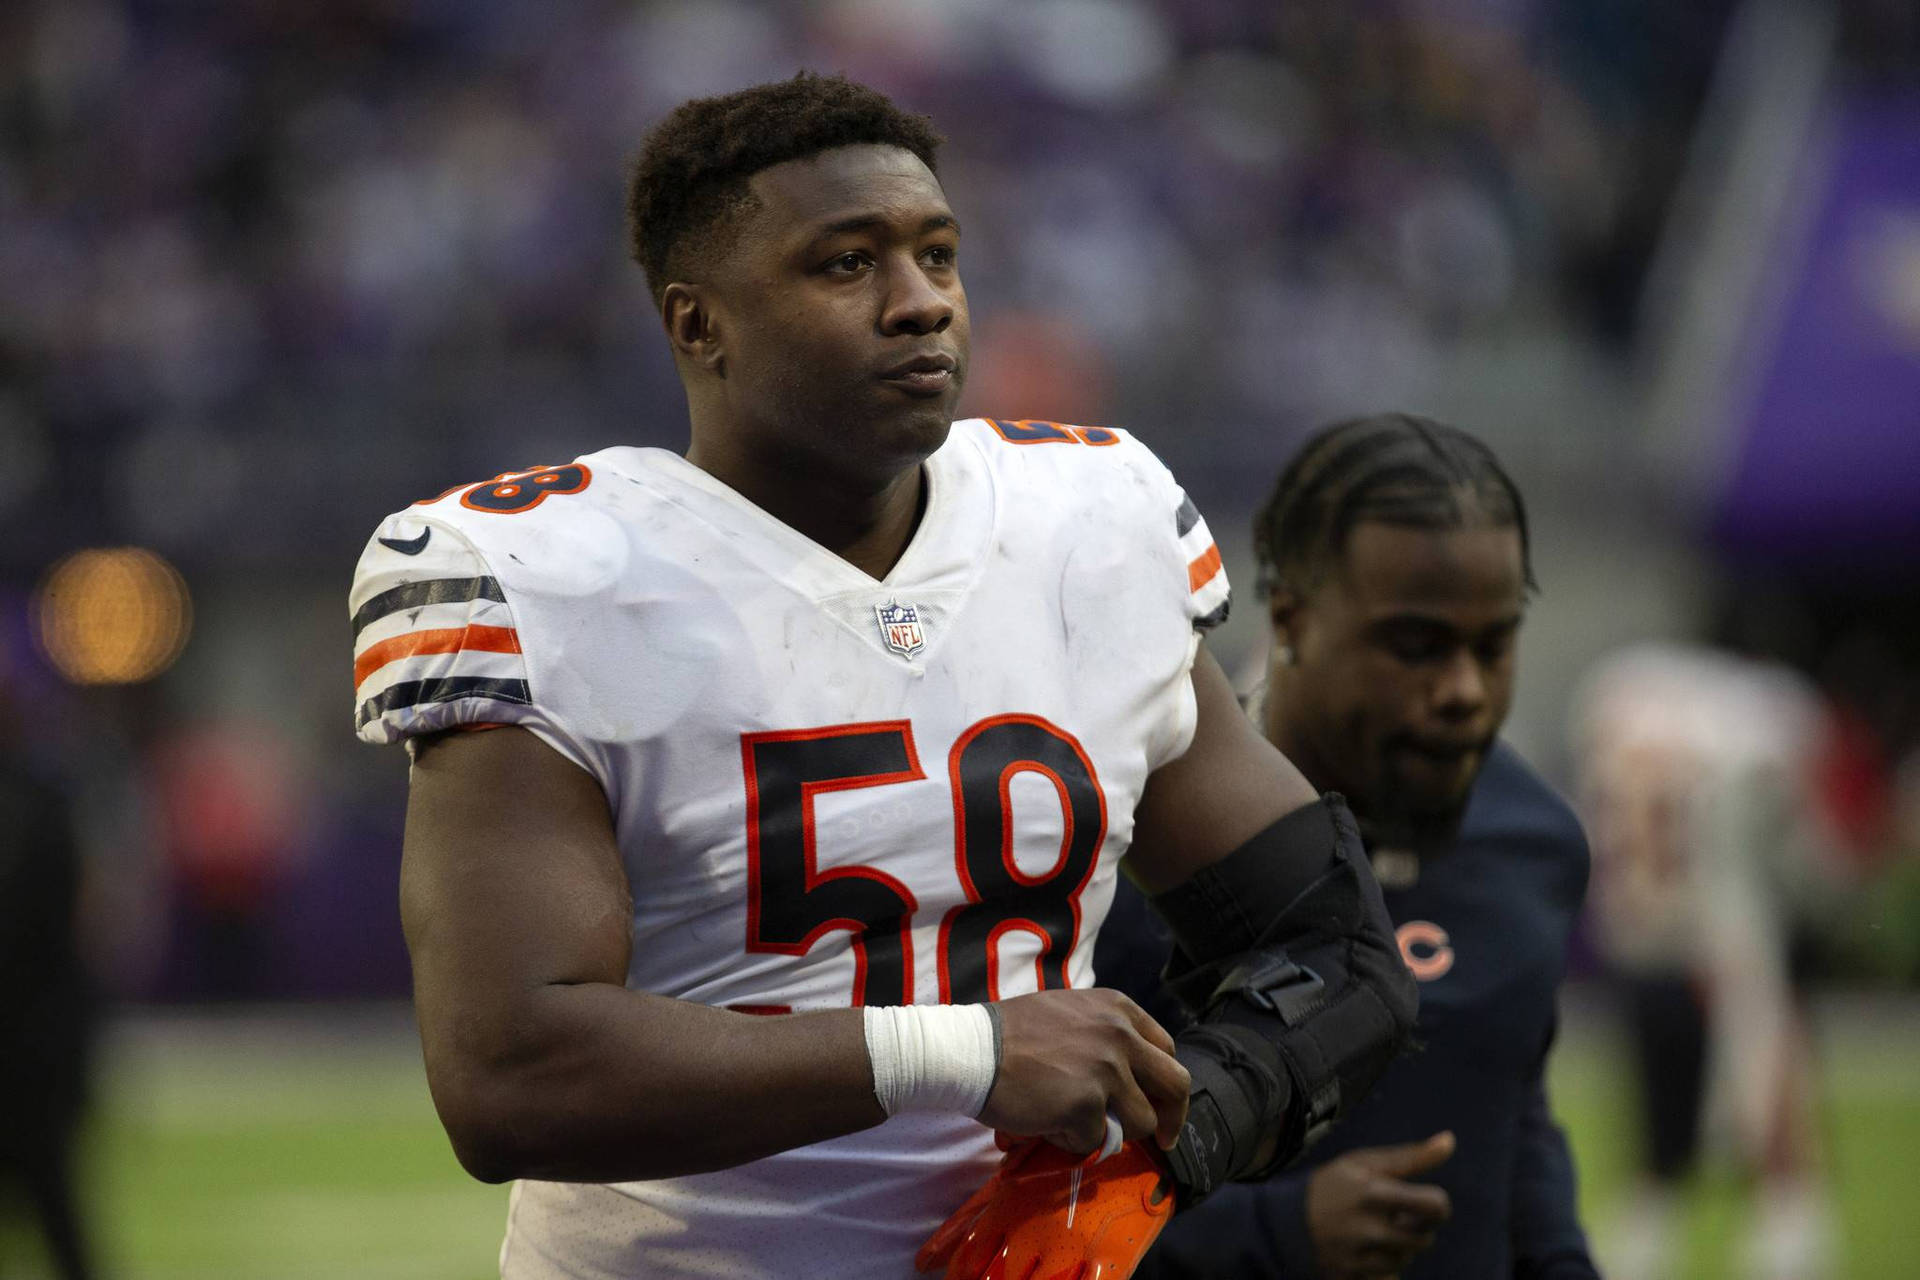 Injured Roquan Smith